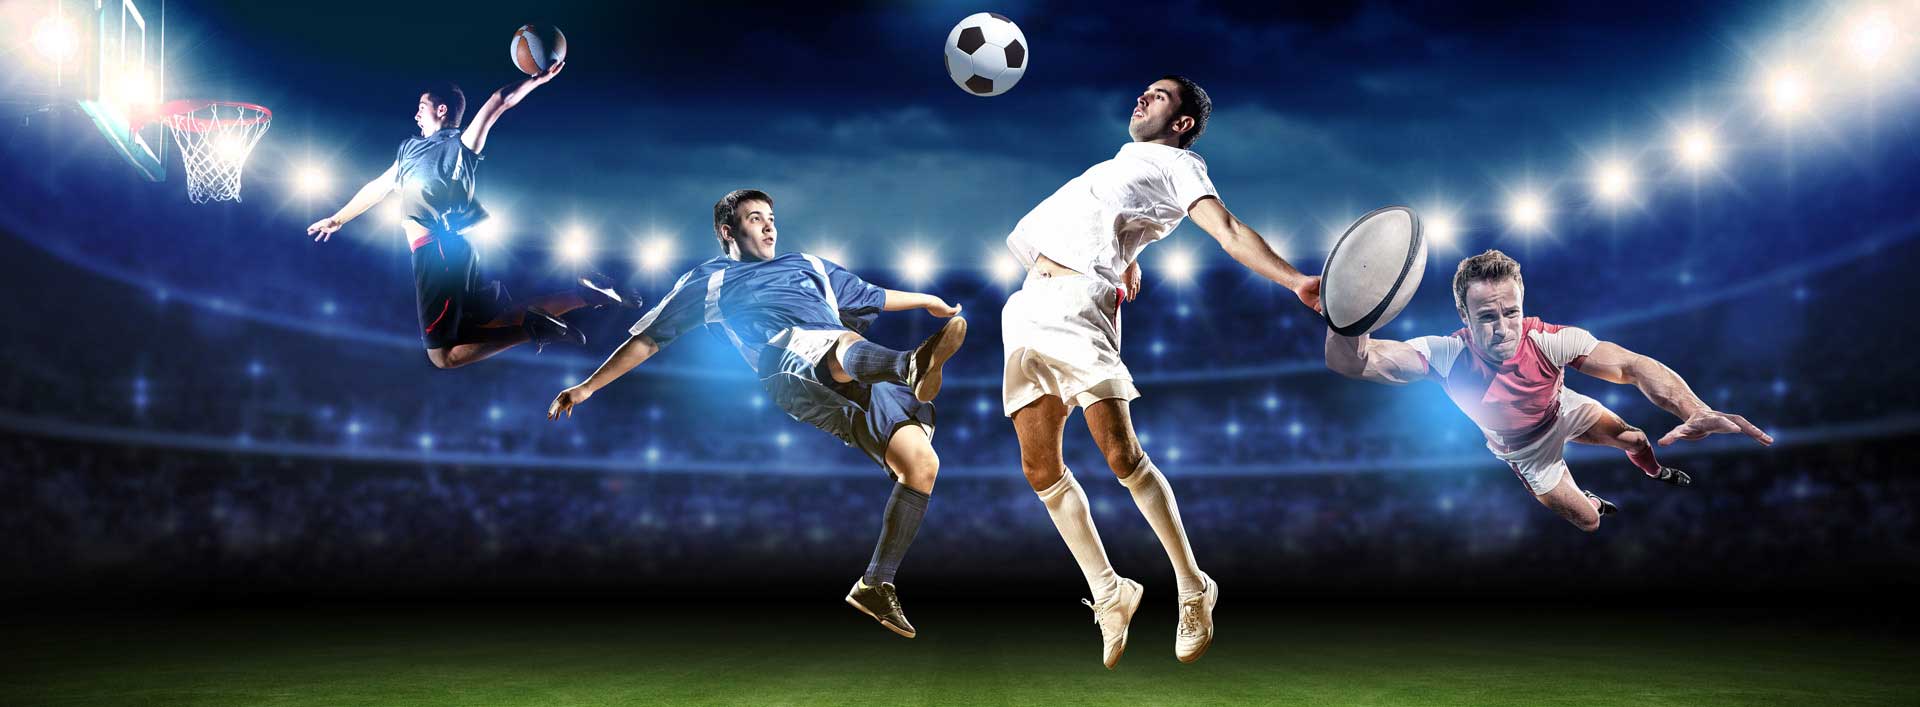 Football Predictions, Soccer Predictions, football and soccer tips, profesional analysis 100% matches, real soccer football fixed matches, todays football betting tips, football betting tips saturday, football accumulator tips for this weekend